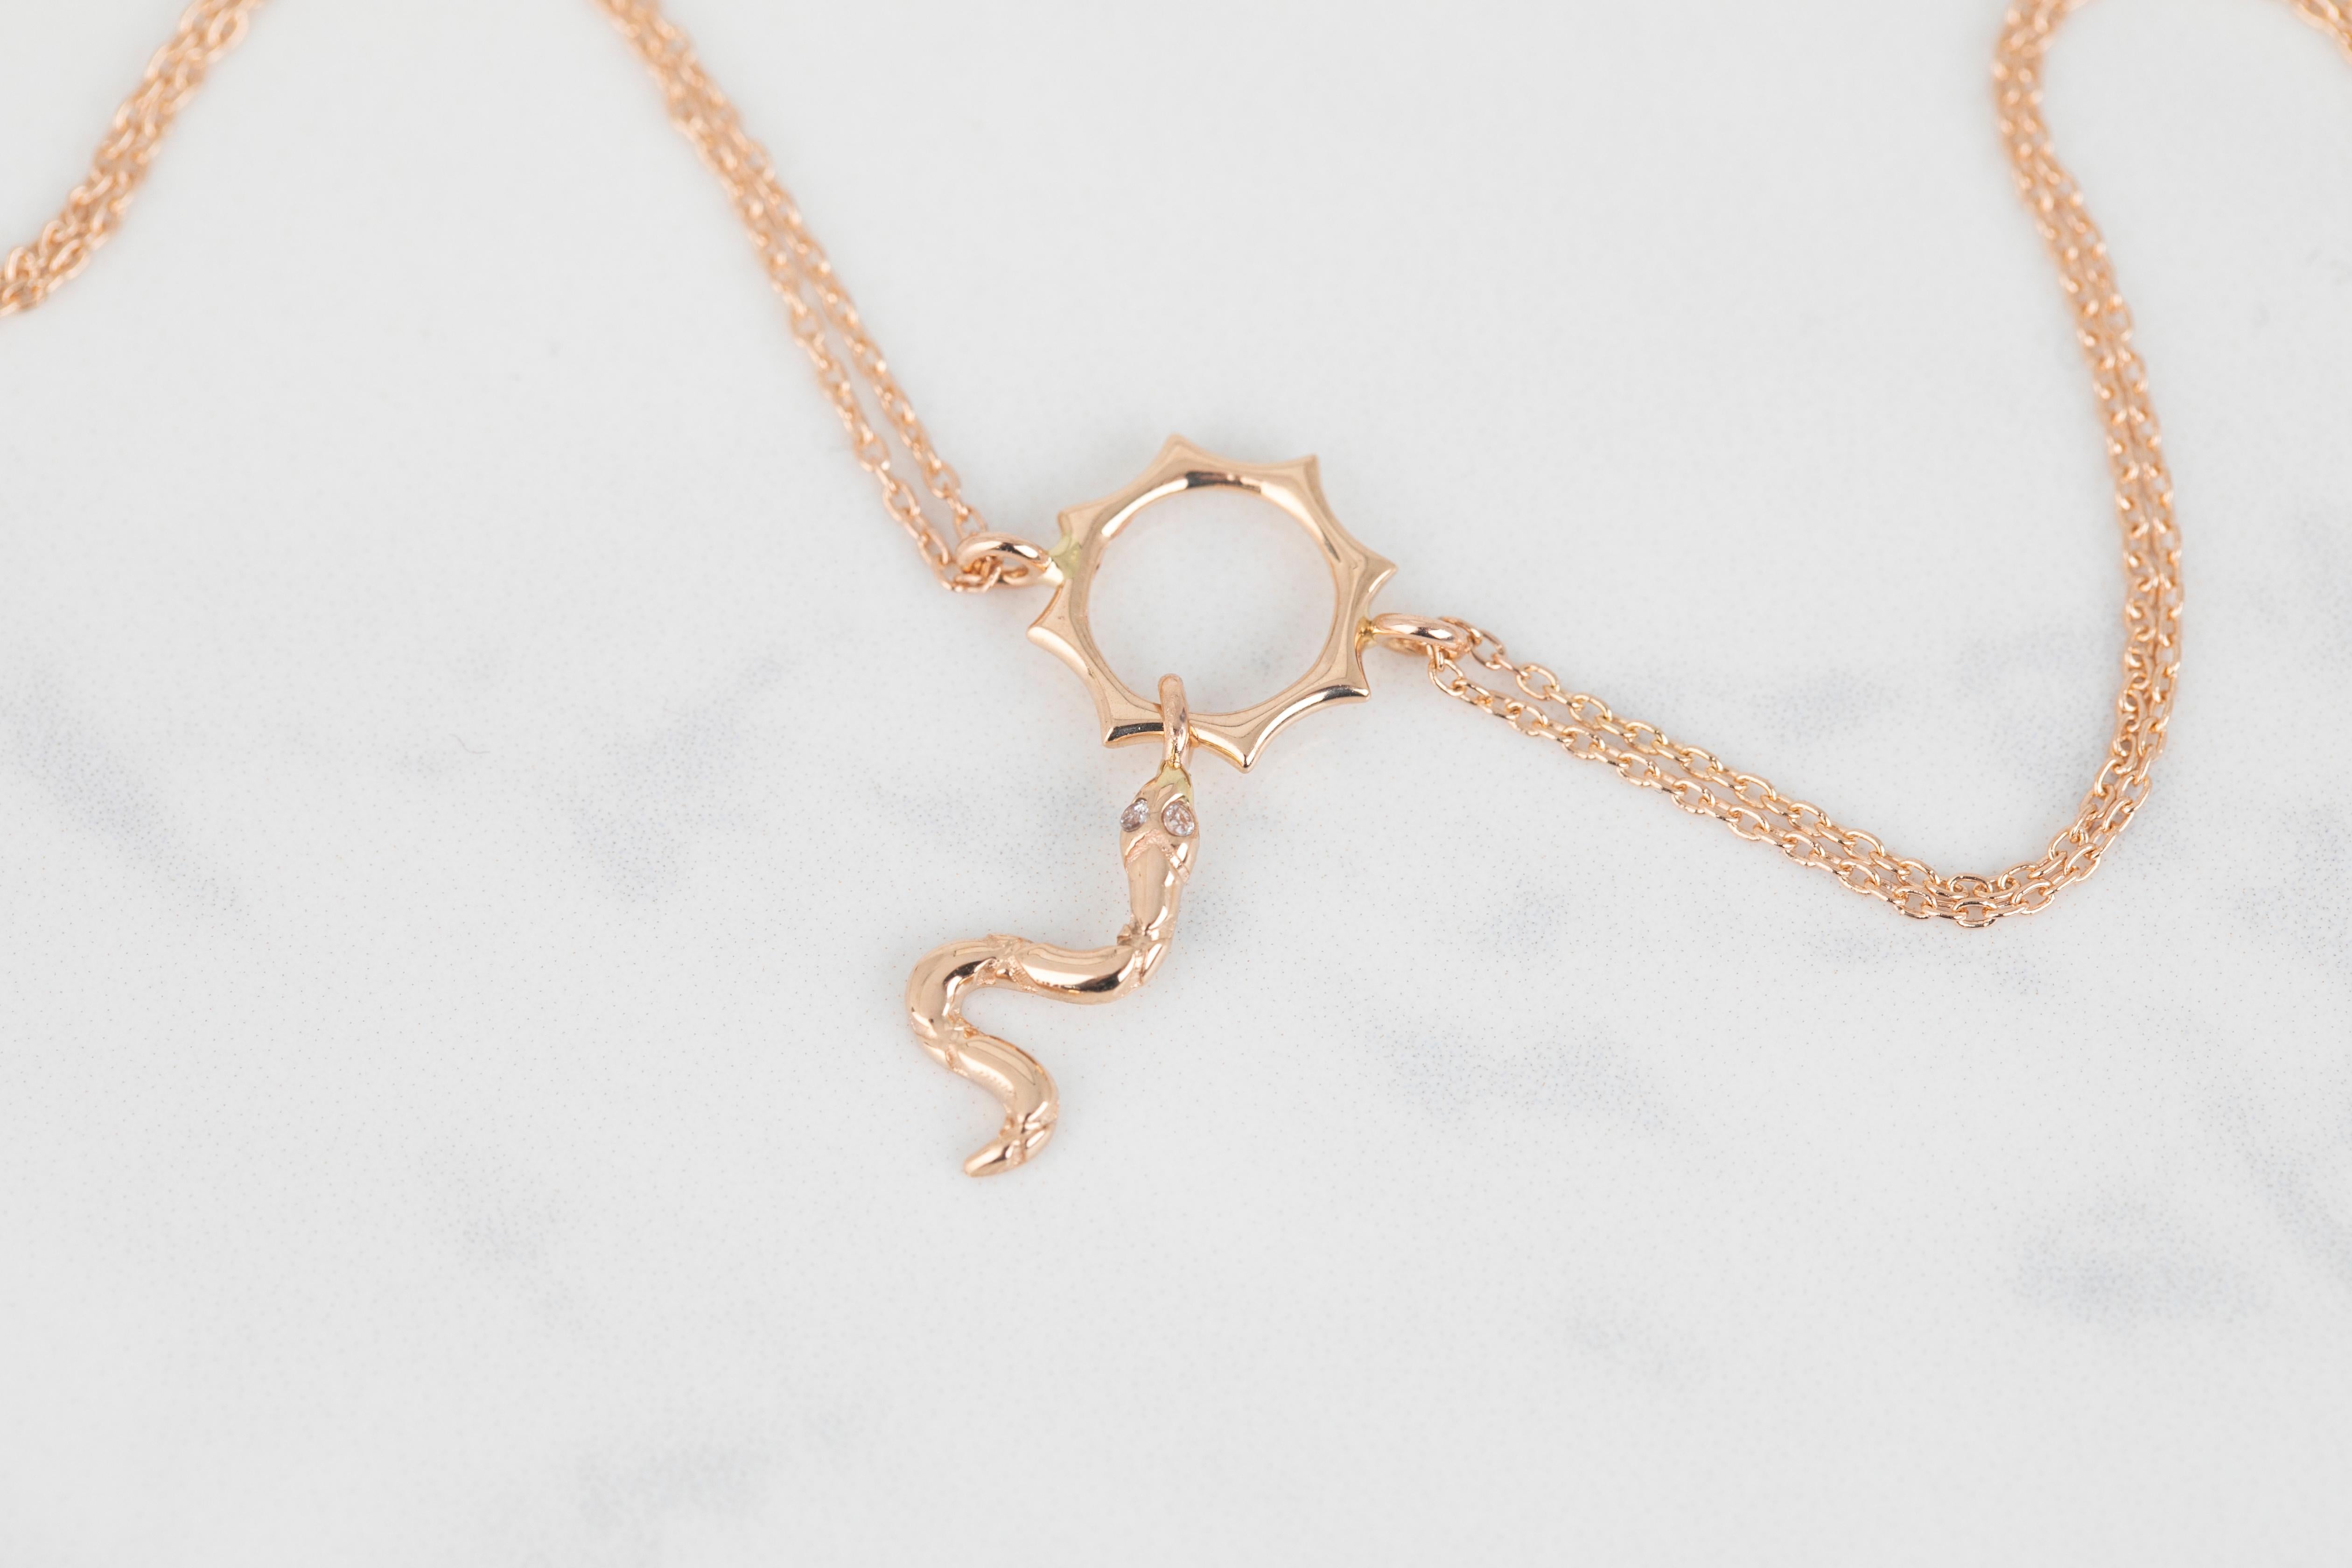 14K Gold Serpent Charm with Sun Dainty Chain Bracelet For Sale 6